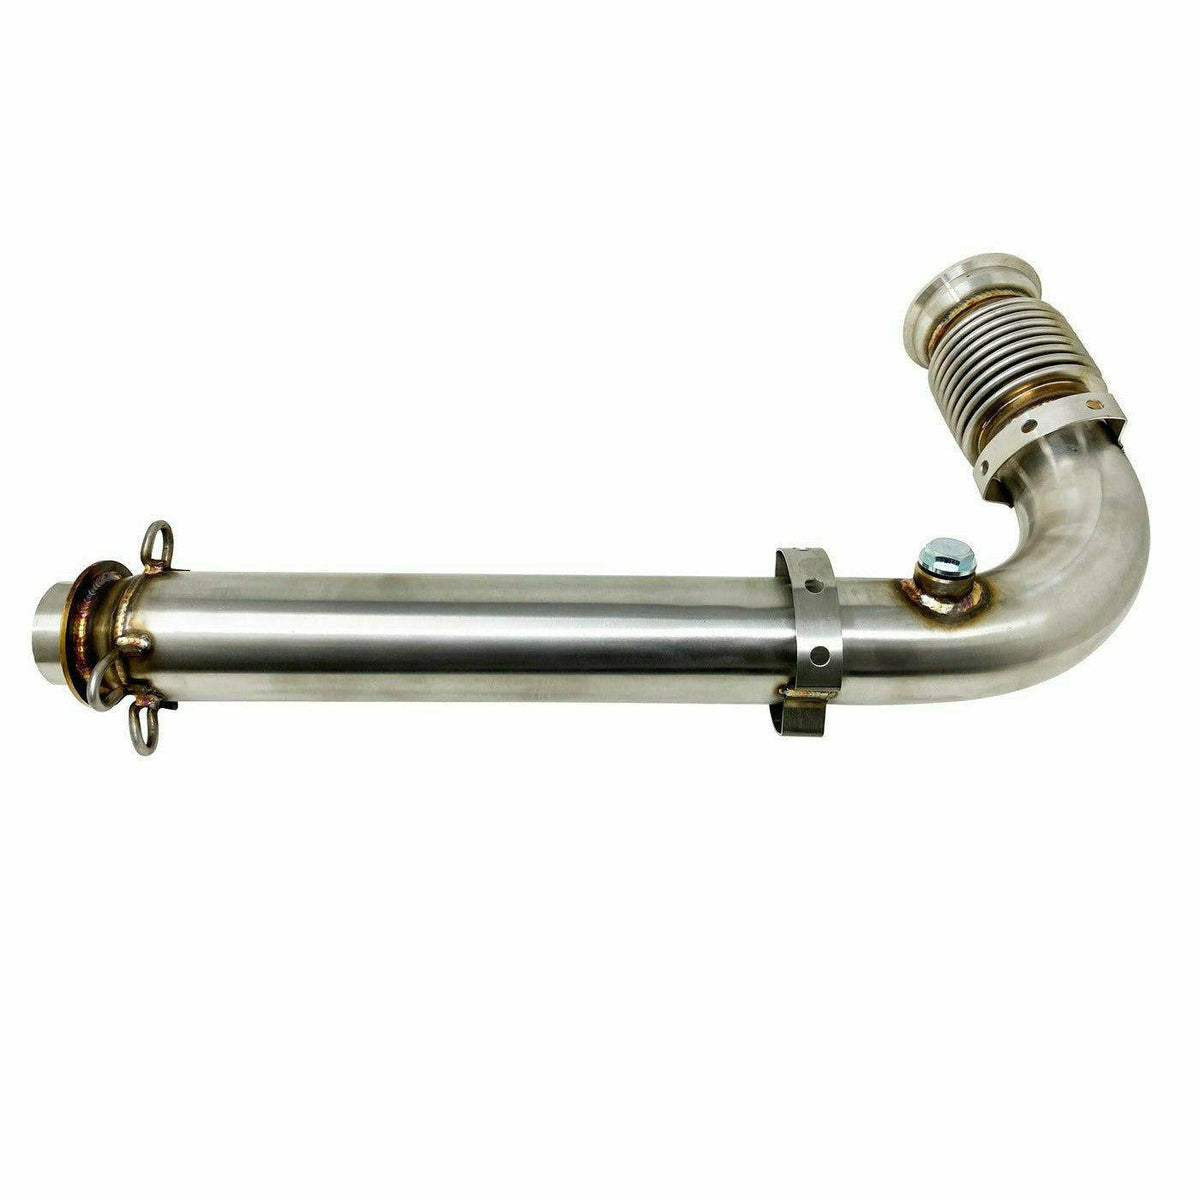 RPM Powersports Can Am Maverick X3 Cat Delete Bypass Pipe